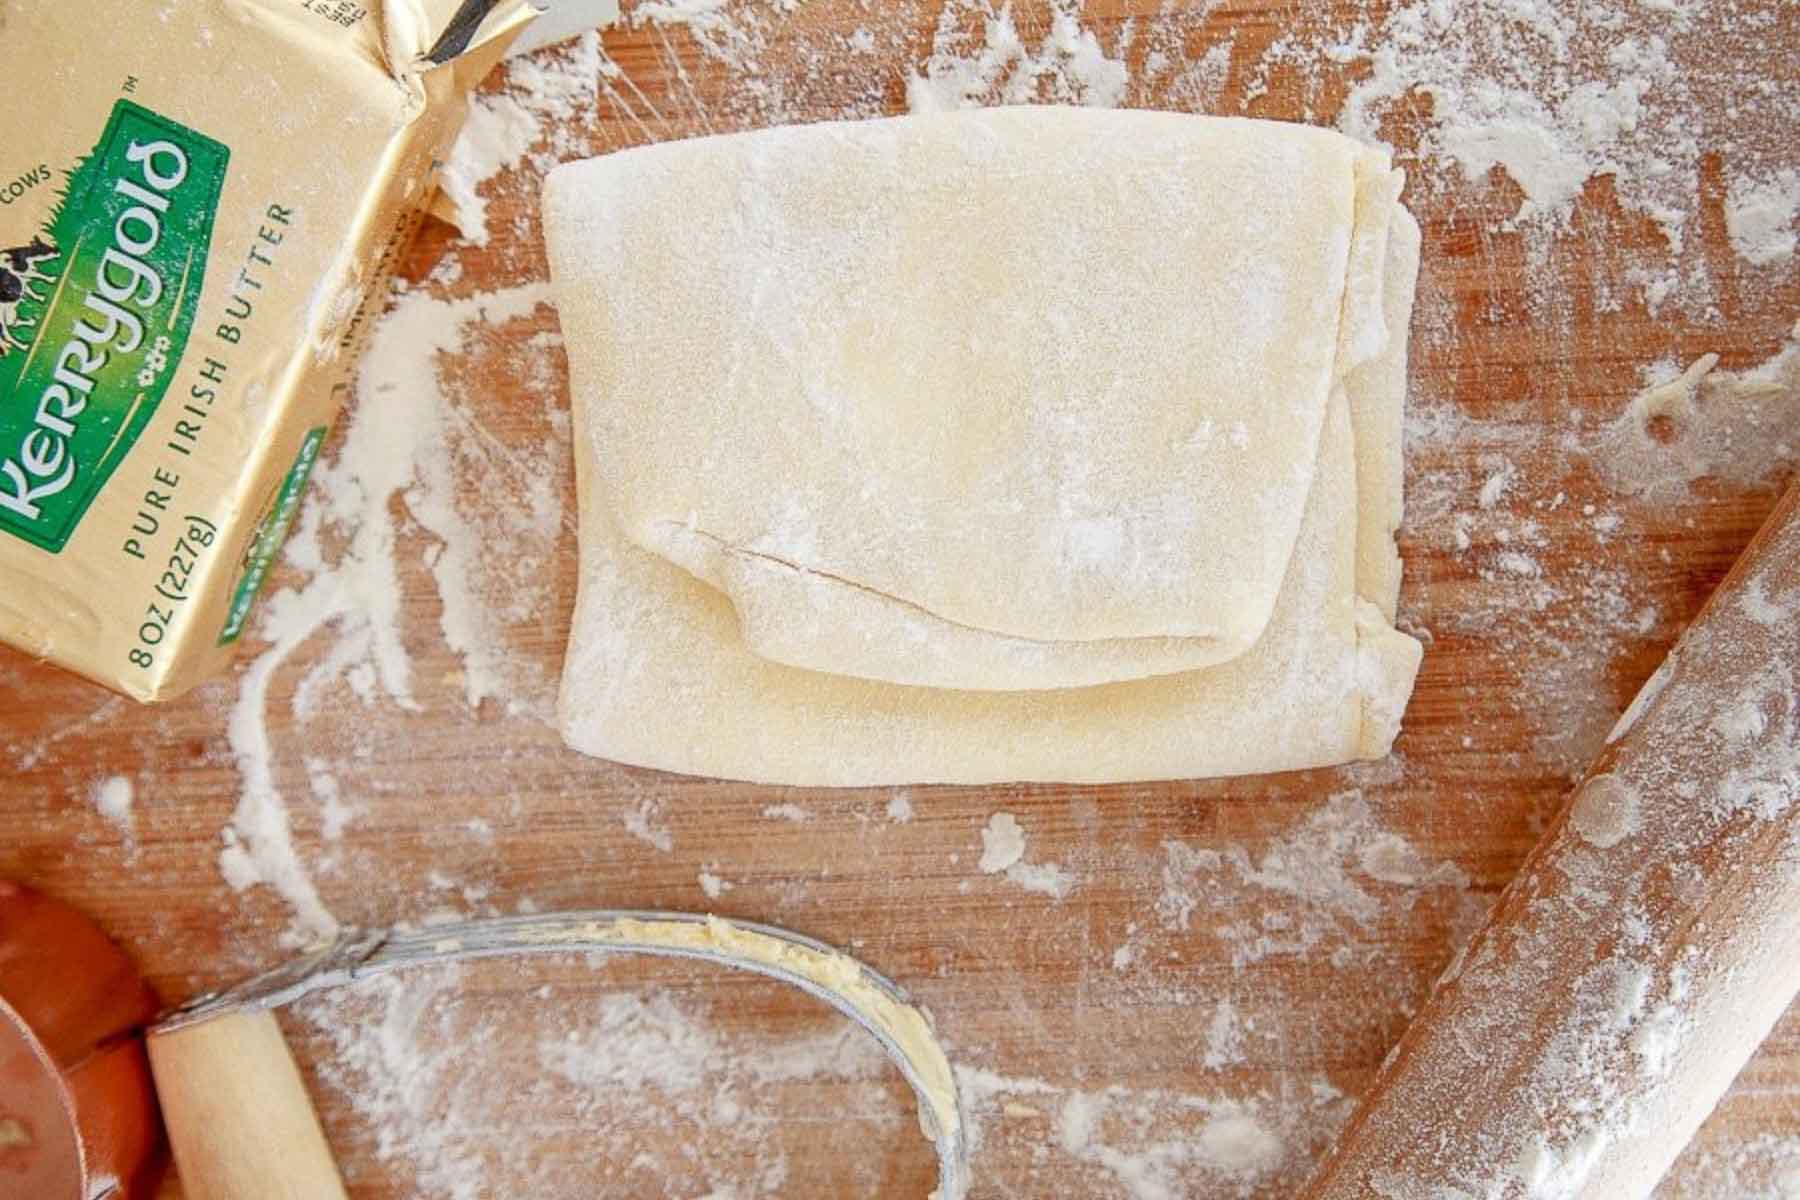 Sheet of homemade puff pastry recipe folded up with butter and pastry blender on side.